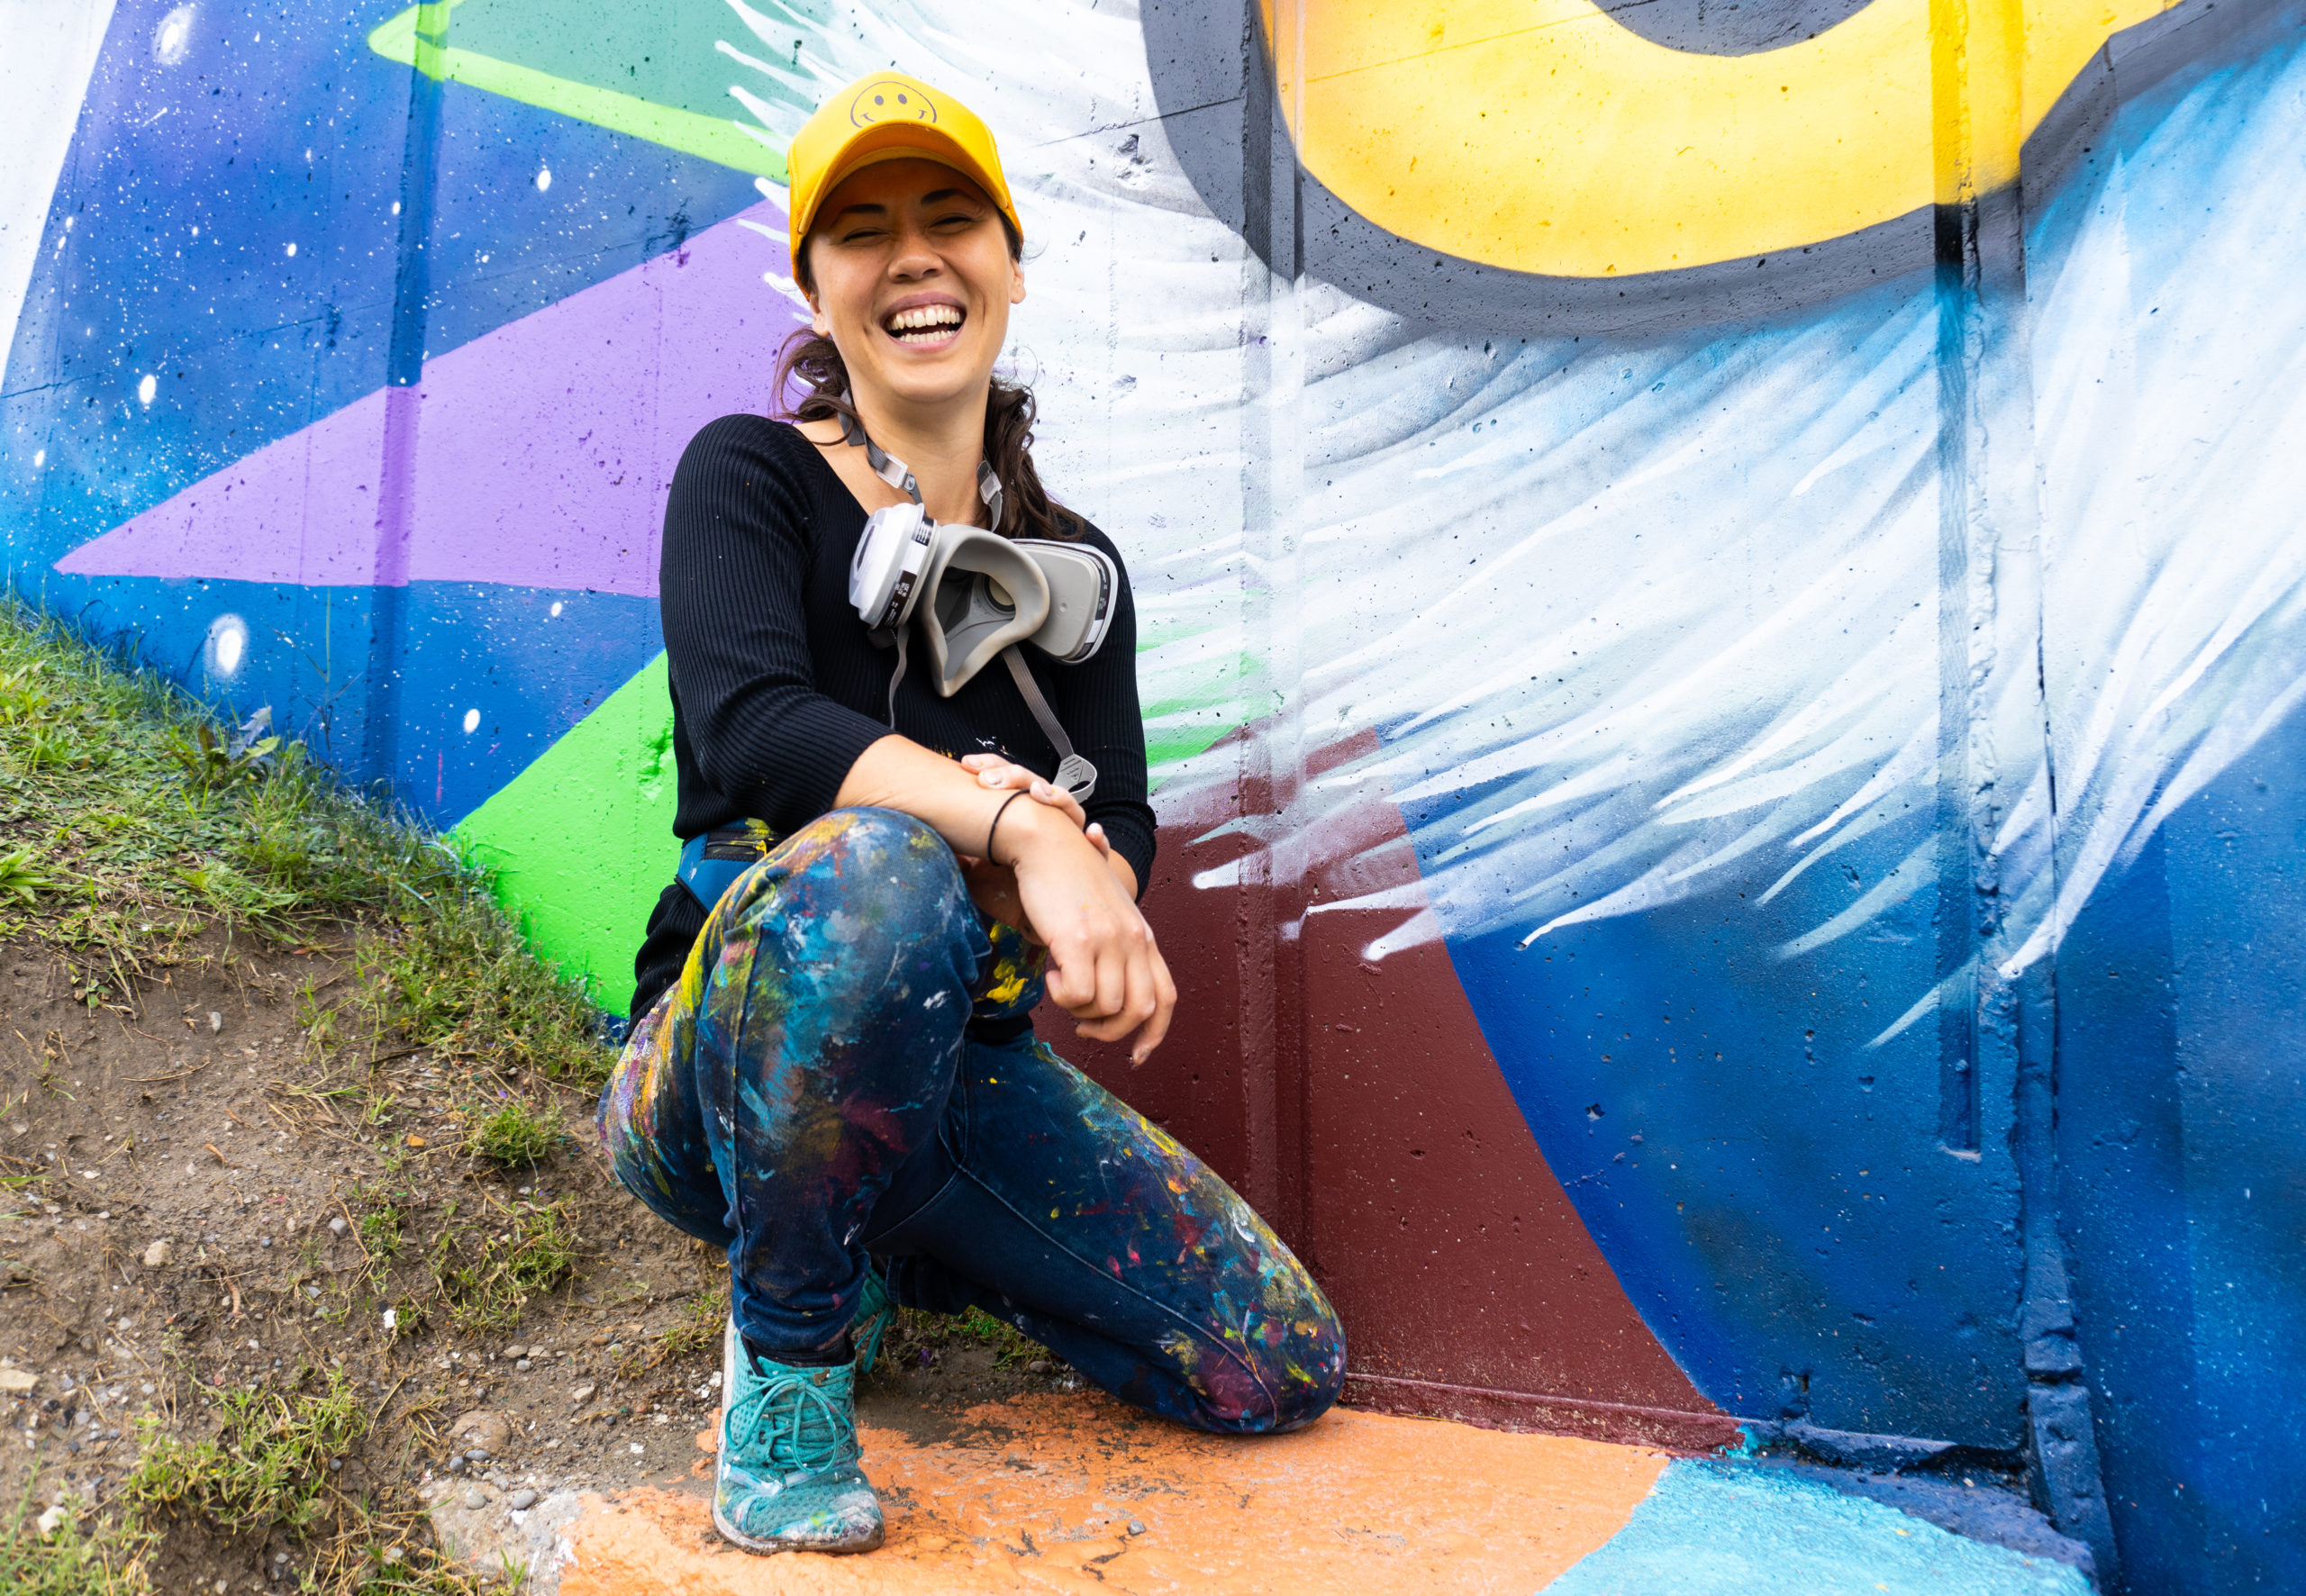 Photo of mural assistant Kseniya Tsoy, she is smiling at the camera, wearing a yellow hat, black shirt, jeans with paint on them and teal shoes. She is kneeling in front of a mural that has an owl eye with colours of blue, yellow, purple, green and burgundy.